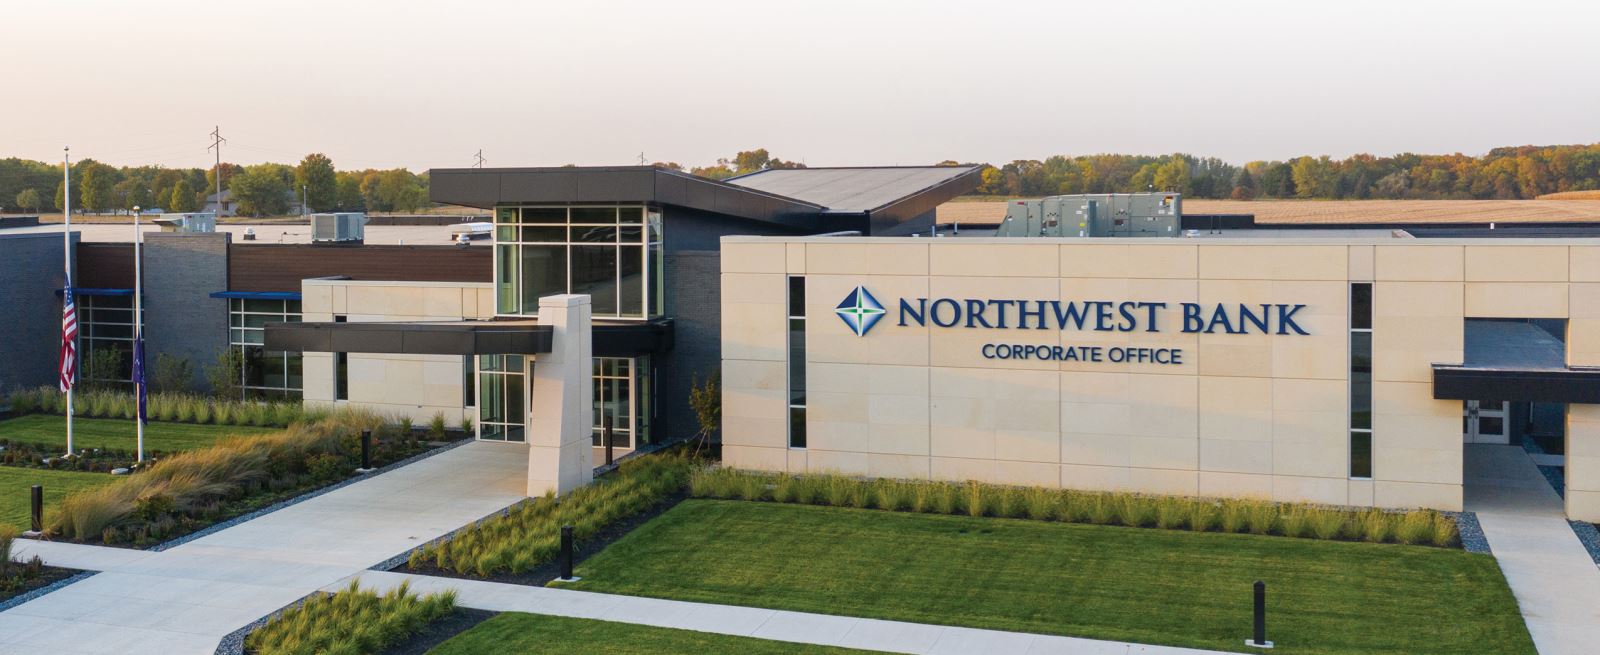 image of NB Corporate Office